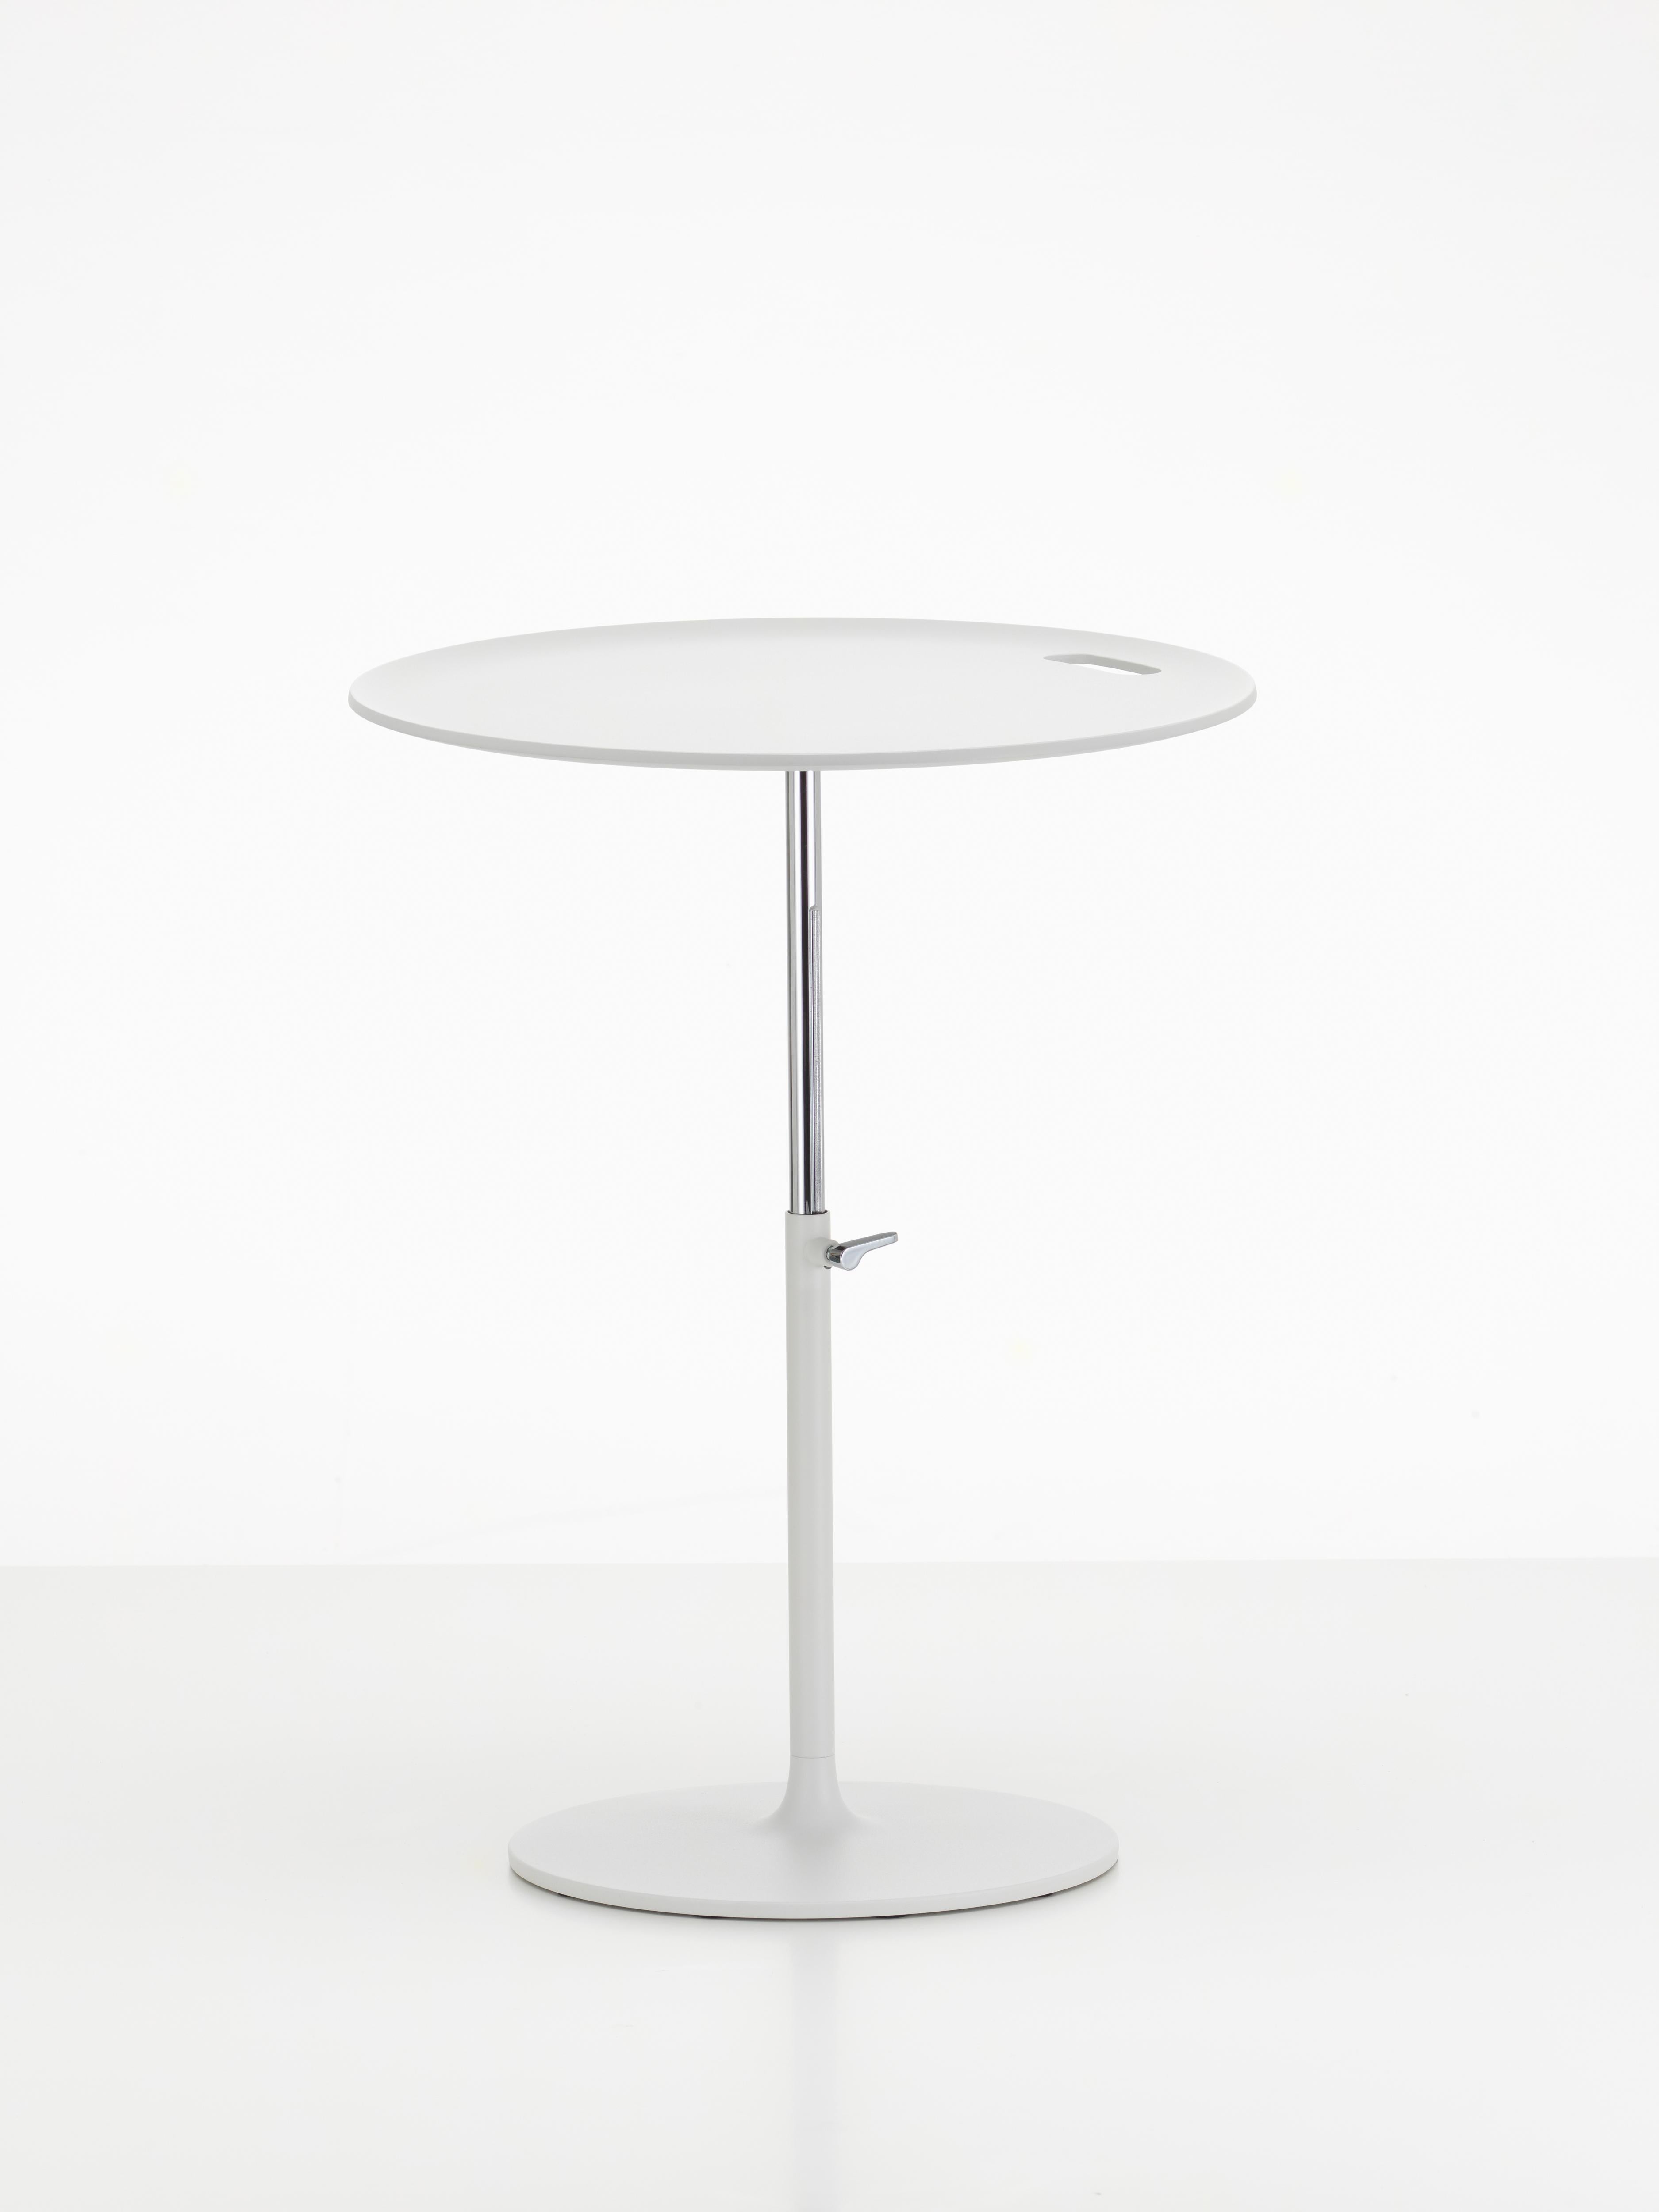 These products are only available in the United States.

The Rise table was designed by Jasper Morrison as a practical companion for the home. The circular form of the occasional table‘s top and base make it an appealing decorative accent in any